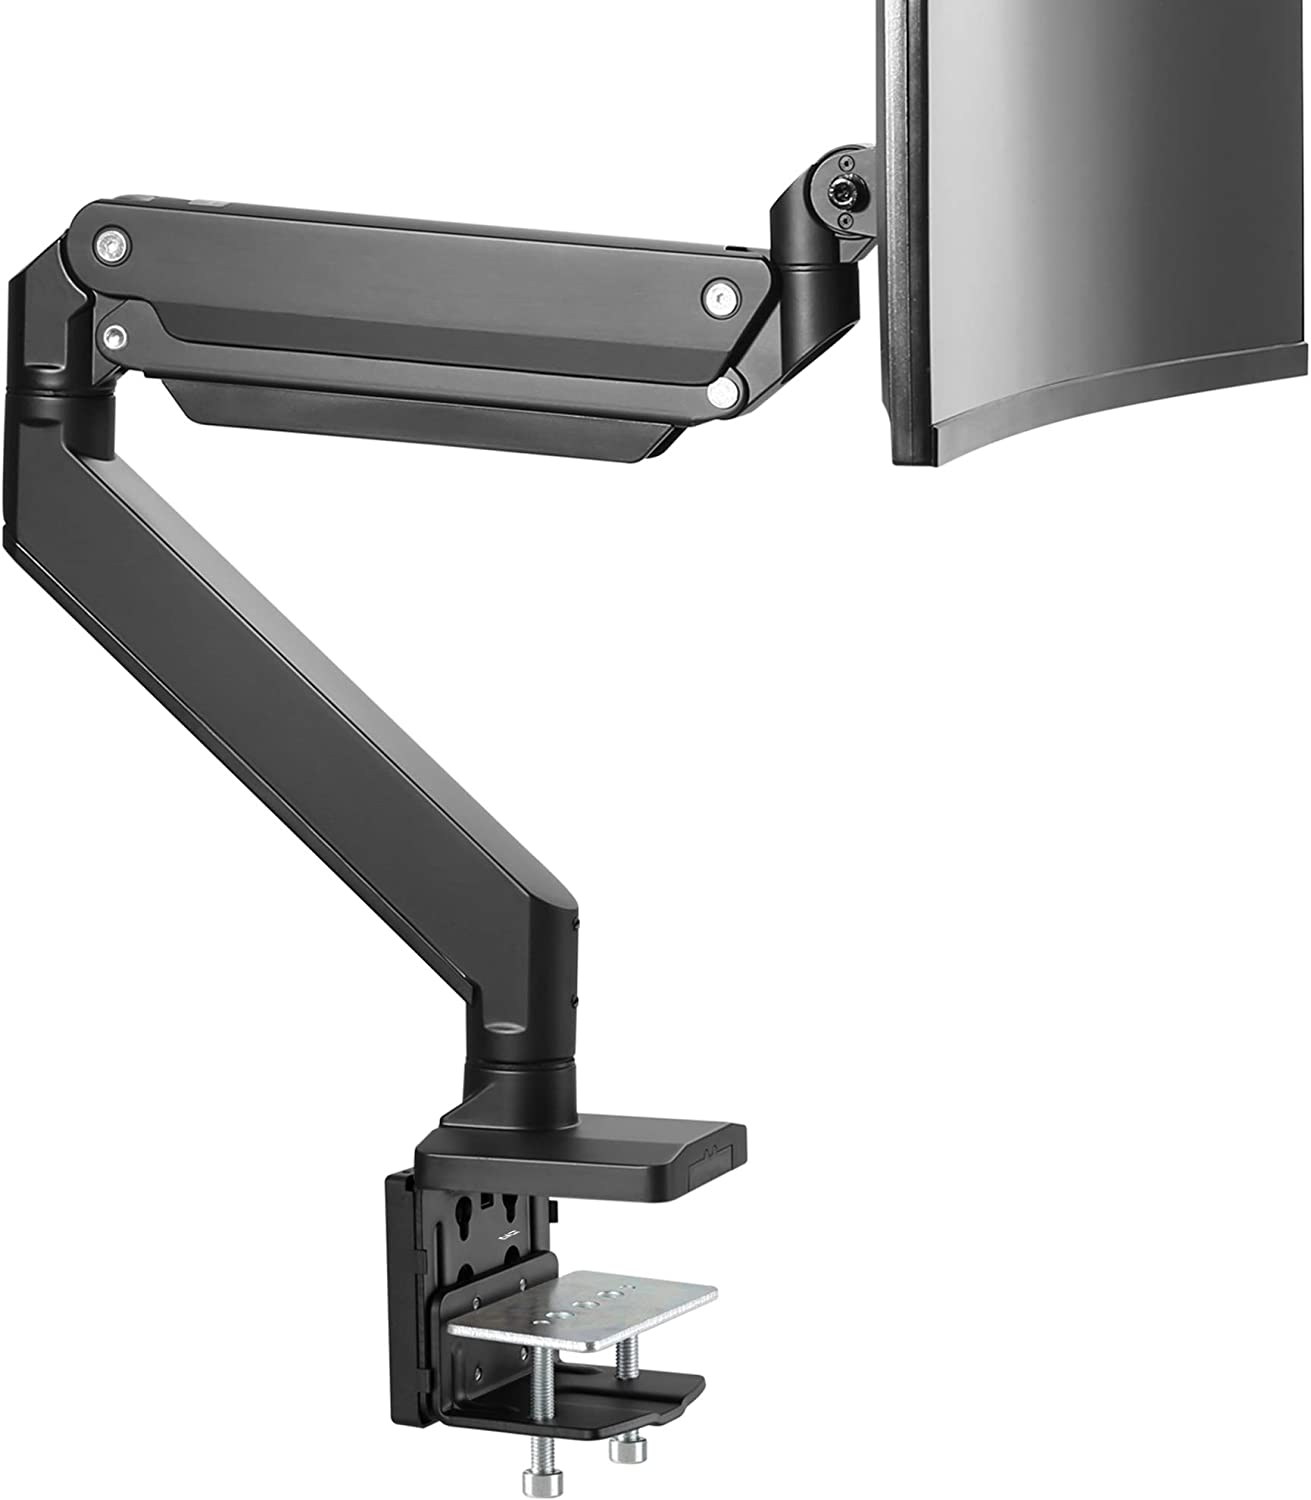 AVLT Dual 13-43 Monitor Arm Desk Mount fits Two Flat/Curved Monitor Full  Motion Height Swivel Tilt Rotation Adjustable Monitor Arm 